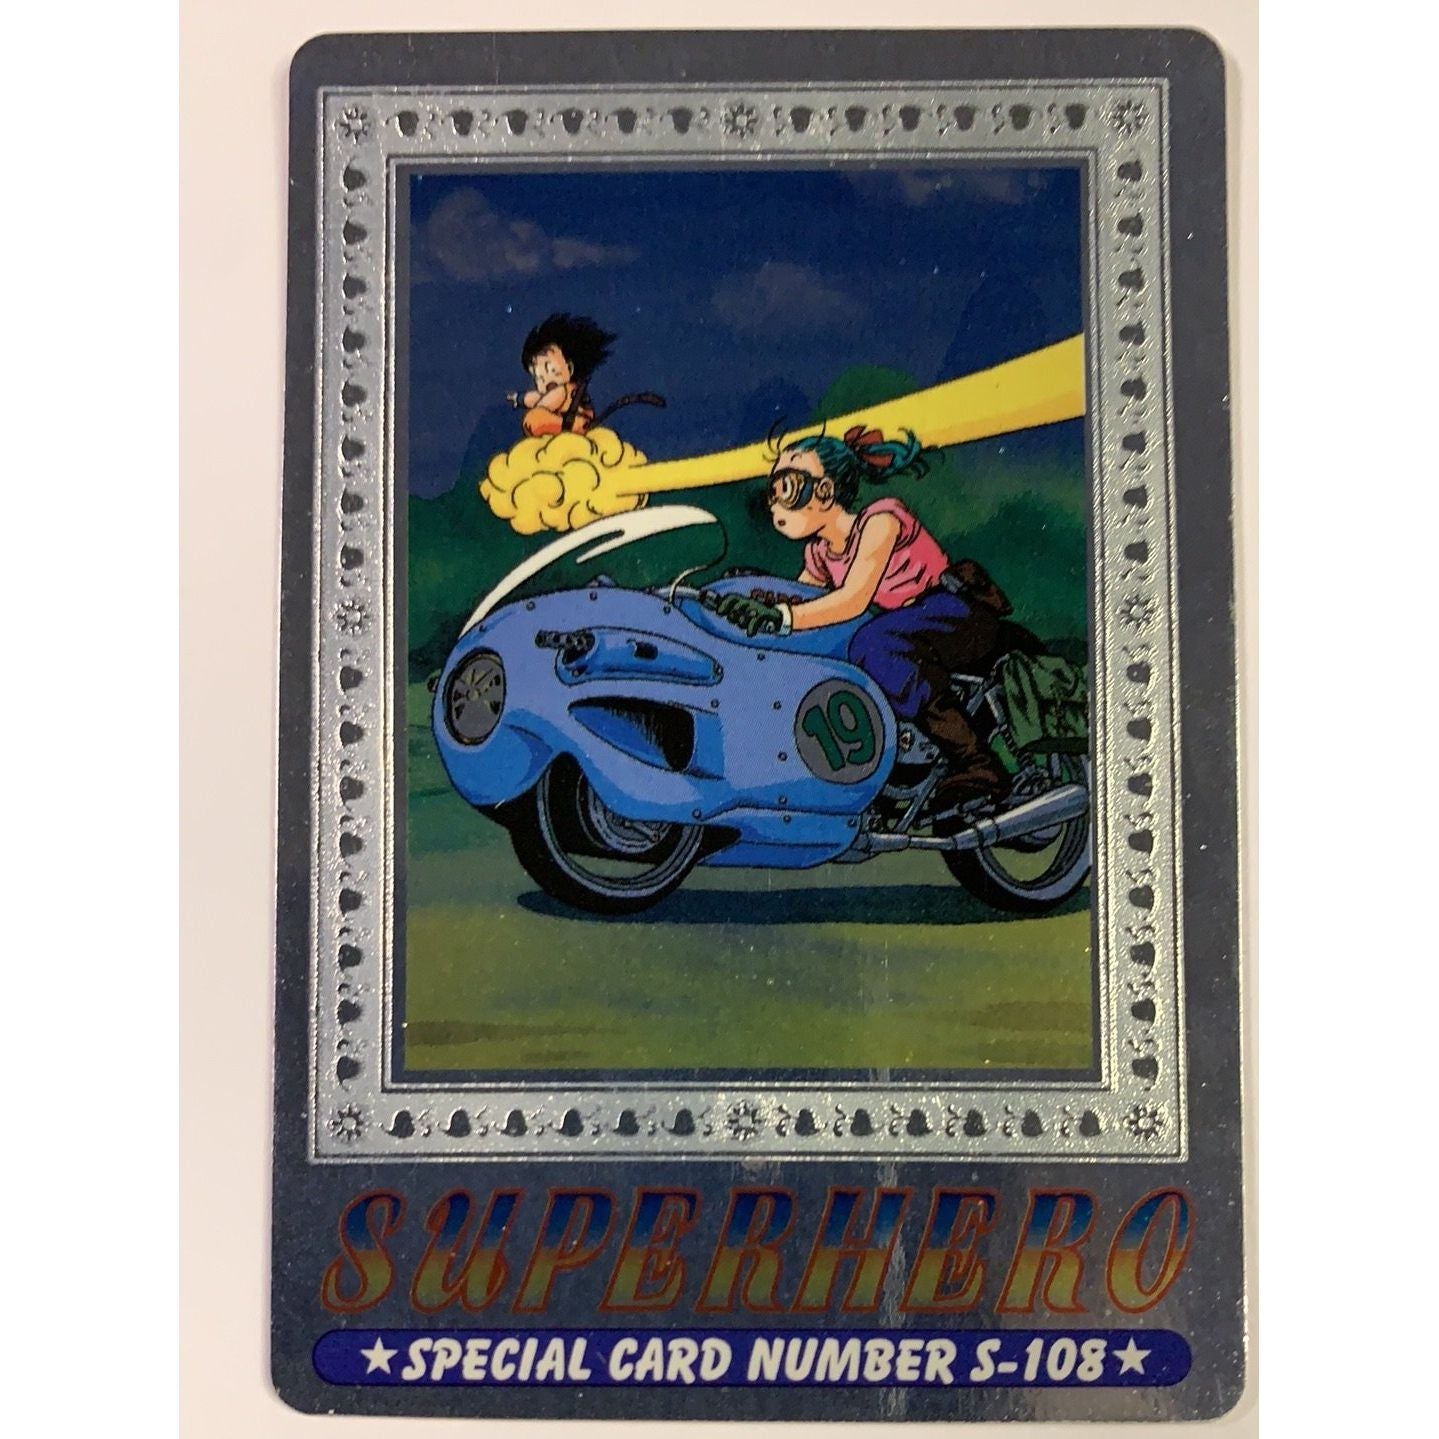  1995 Cardass Adali Super Hero Special Card S-108 Silver Foil  Local Legends Cards & Collectibles